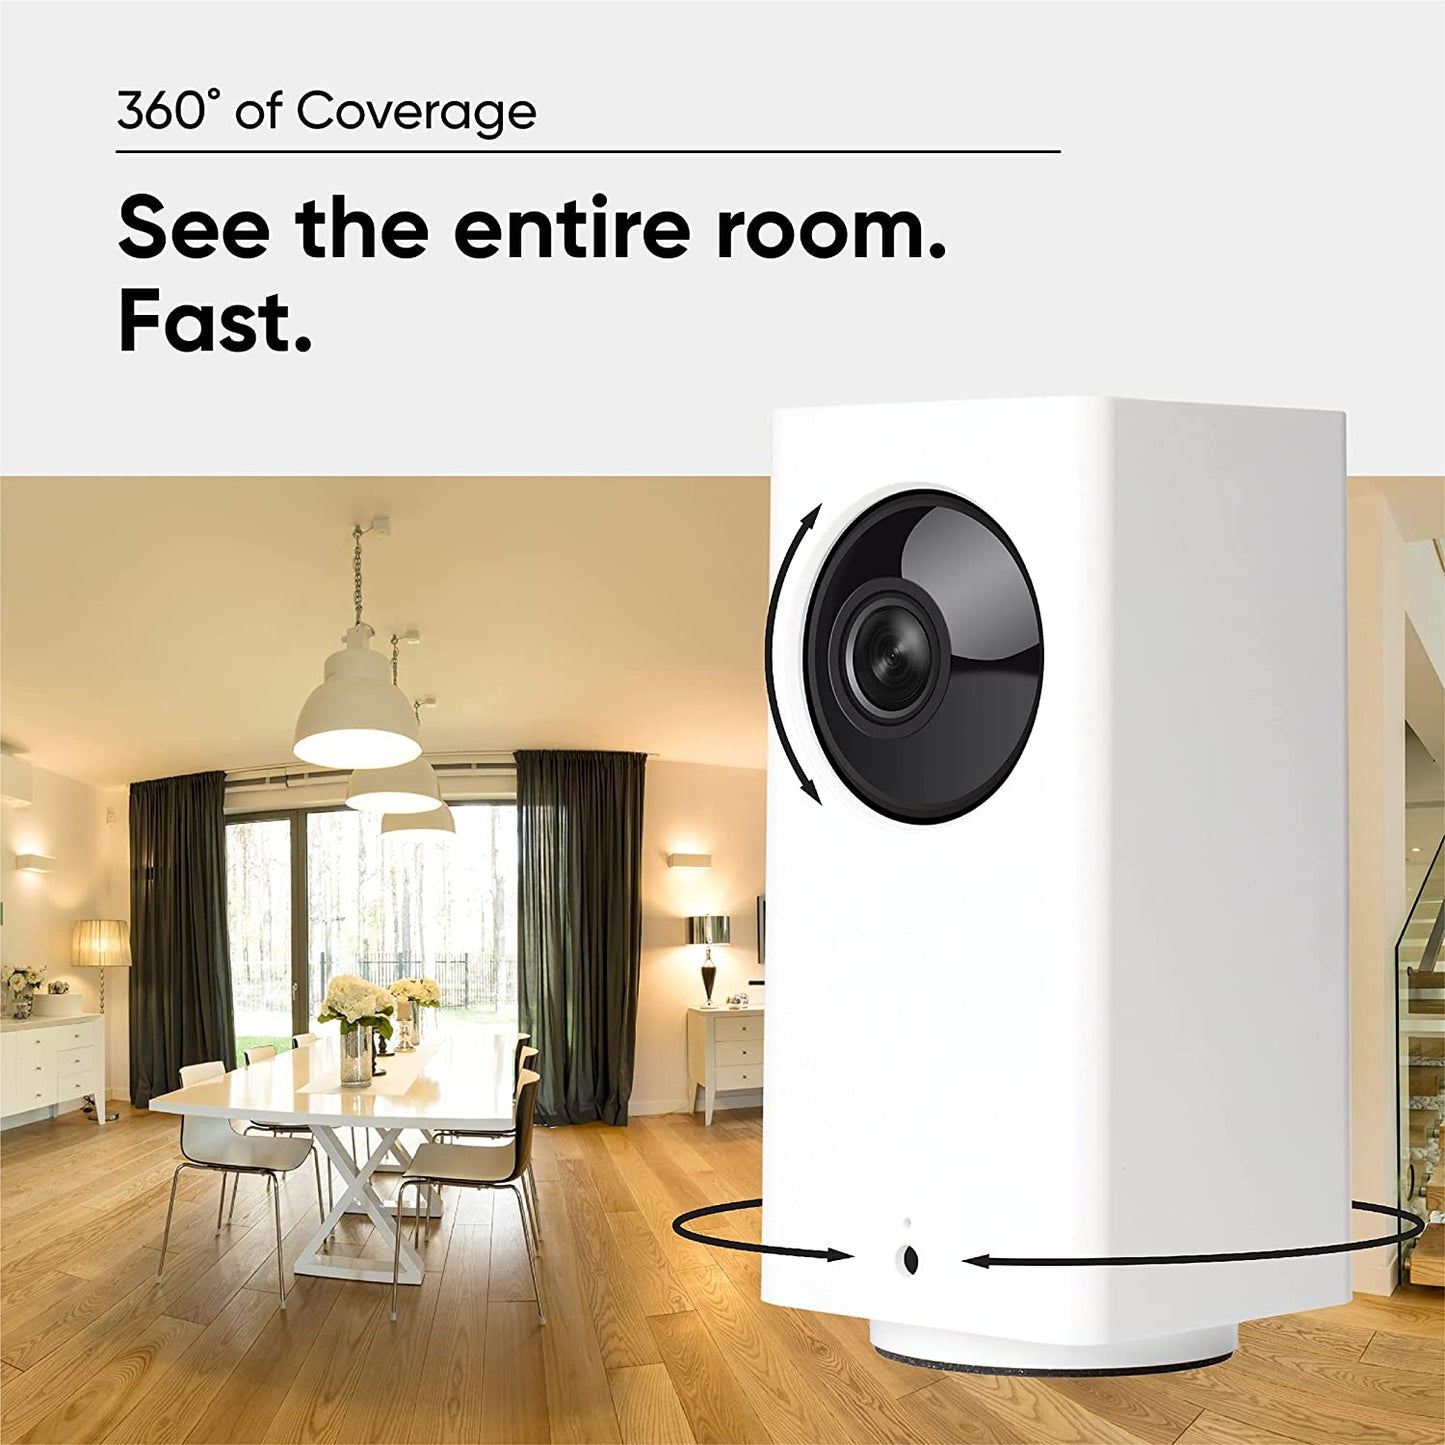 Text Overlay "360 degree of coverage.". Pan v2 camera rotating inside a dining room.